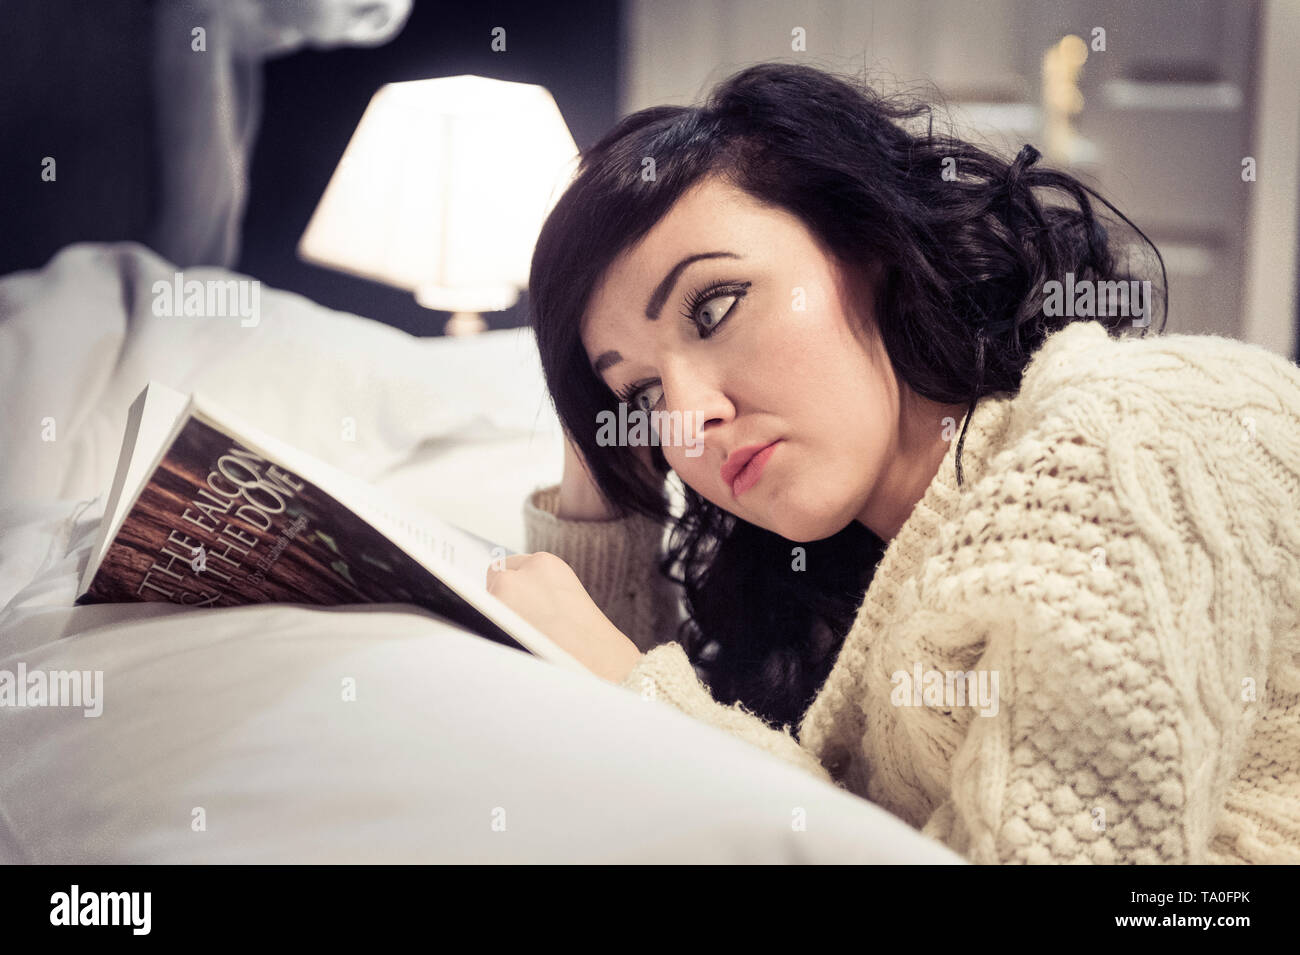 Young woman laying on a bed reading a book. Stock Photo